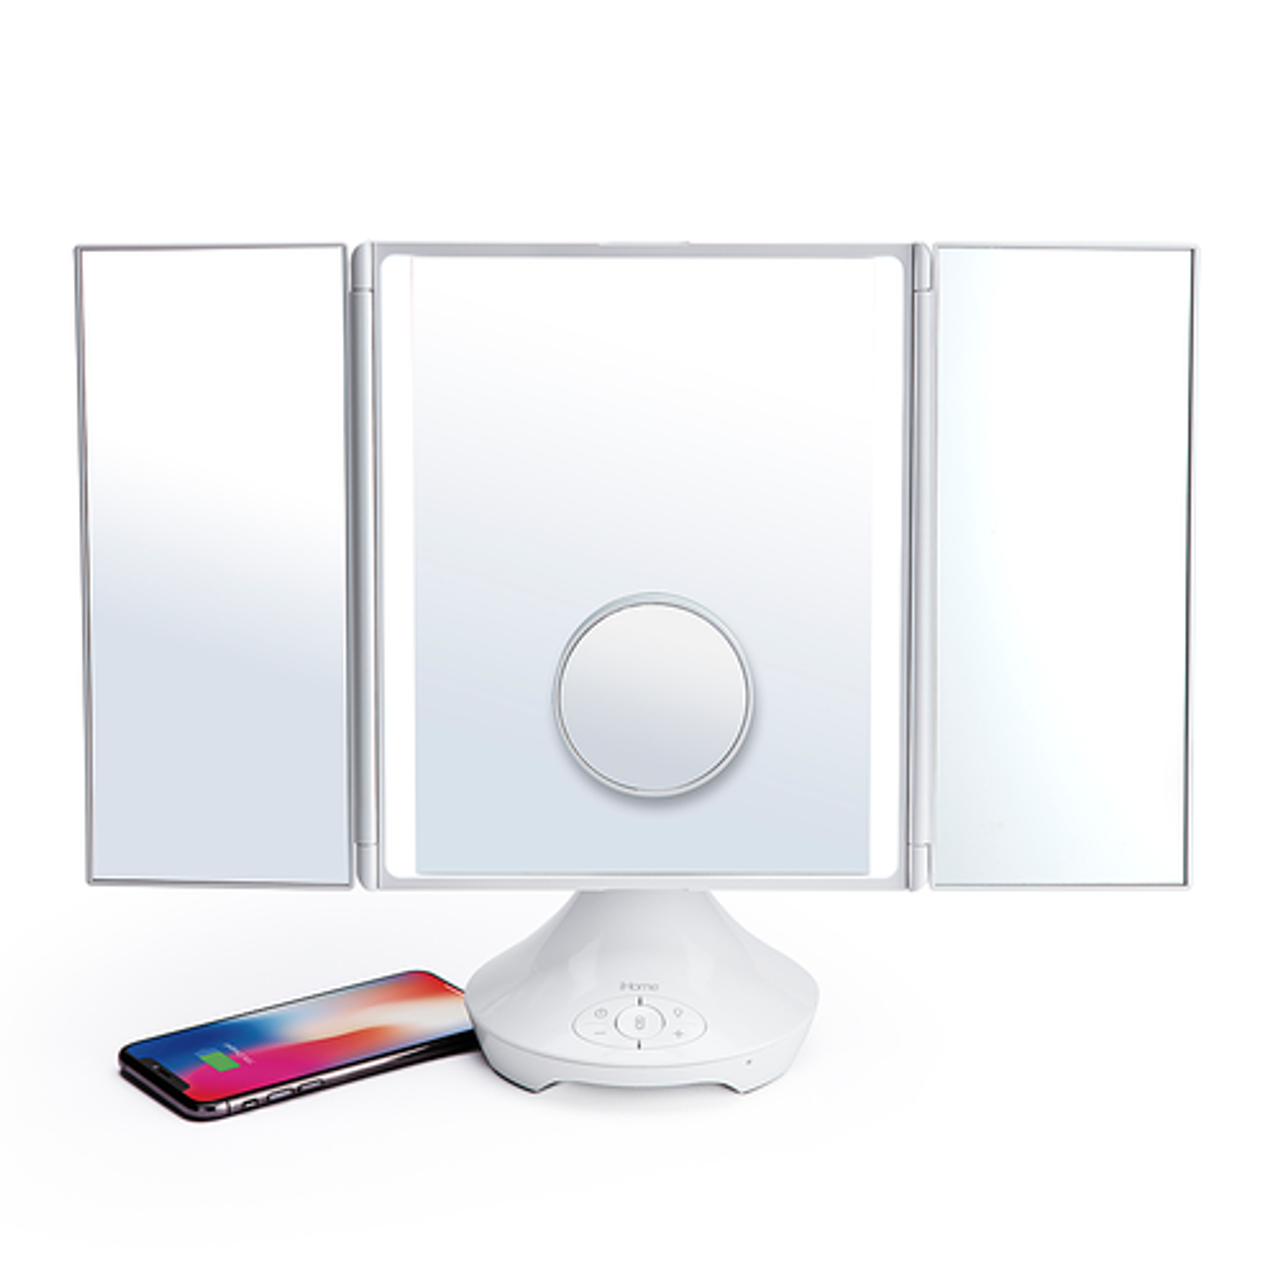 iHome - REFLECT TRIFOLD - Vanity Speaker with Bluetooth, Speakerphone, and USB Charging - White